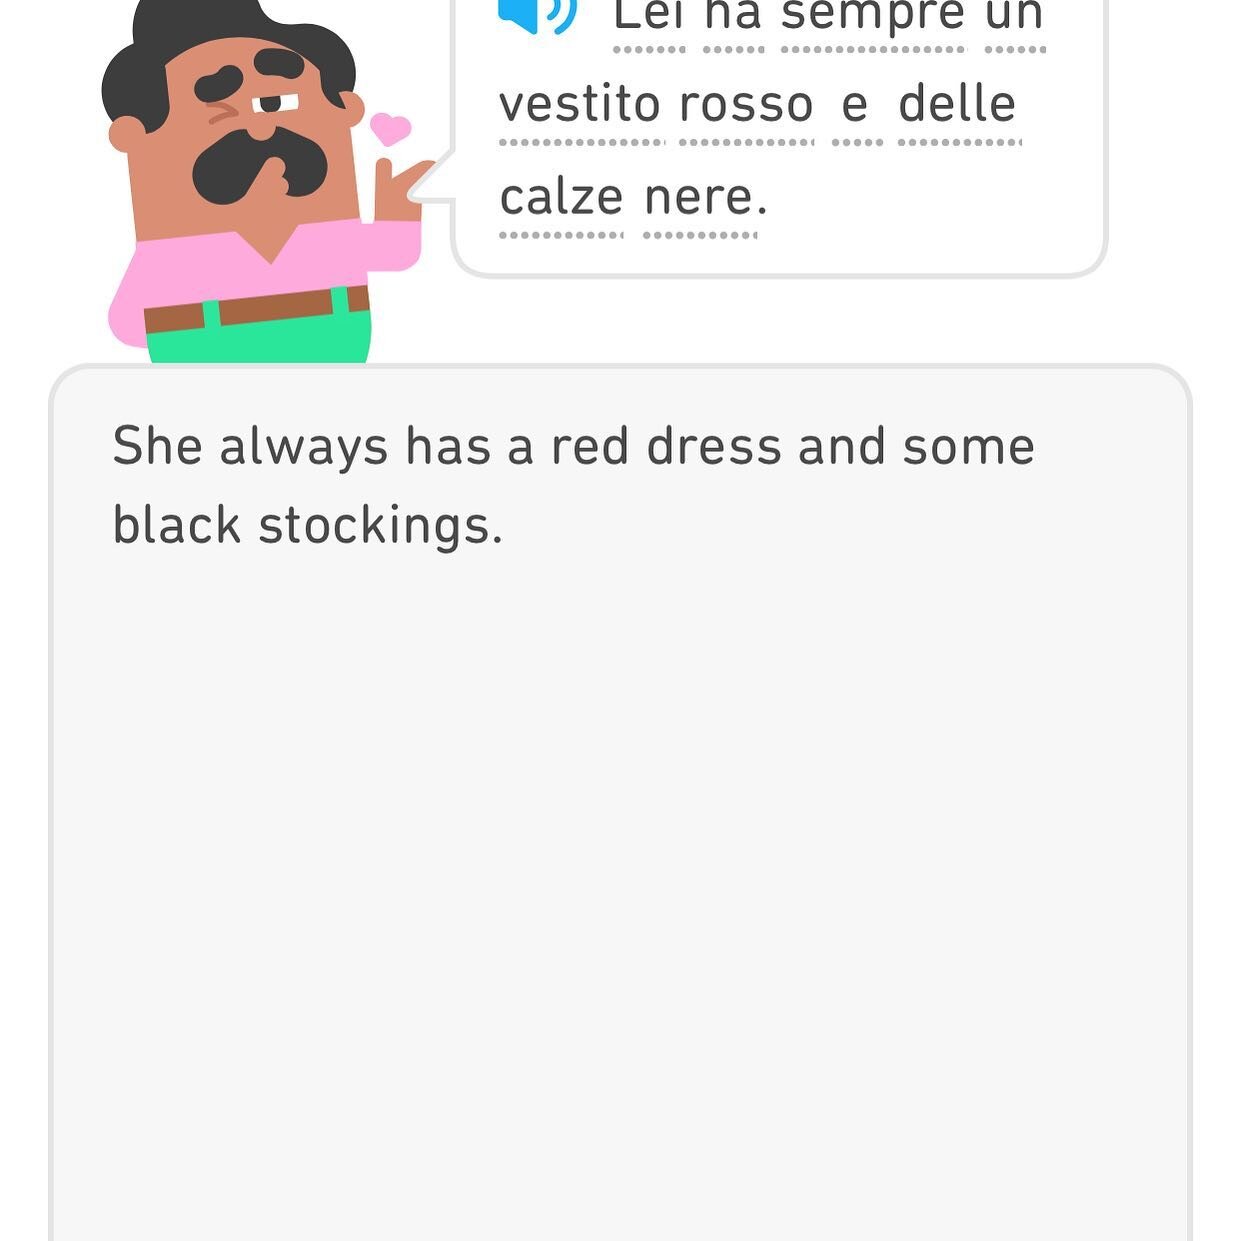 Feeling super called out right now. 

Apparently, @duolingo can see into my closet 😳

Anyone else?
#💃🏻 #🇮🇹